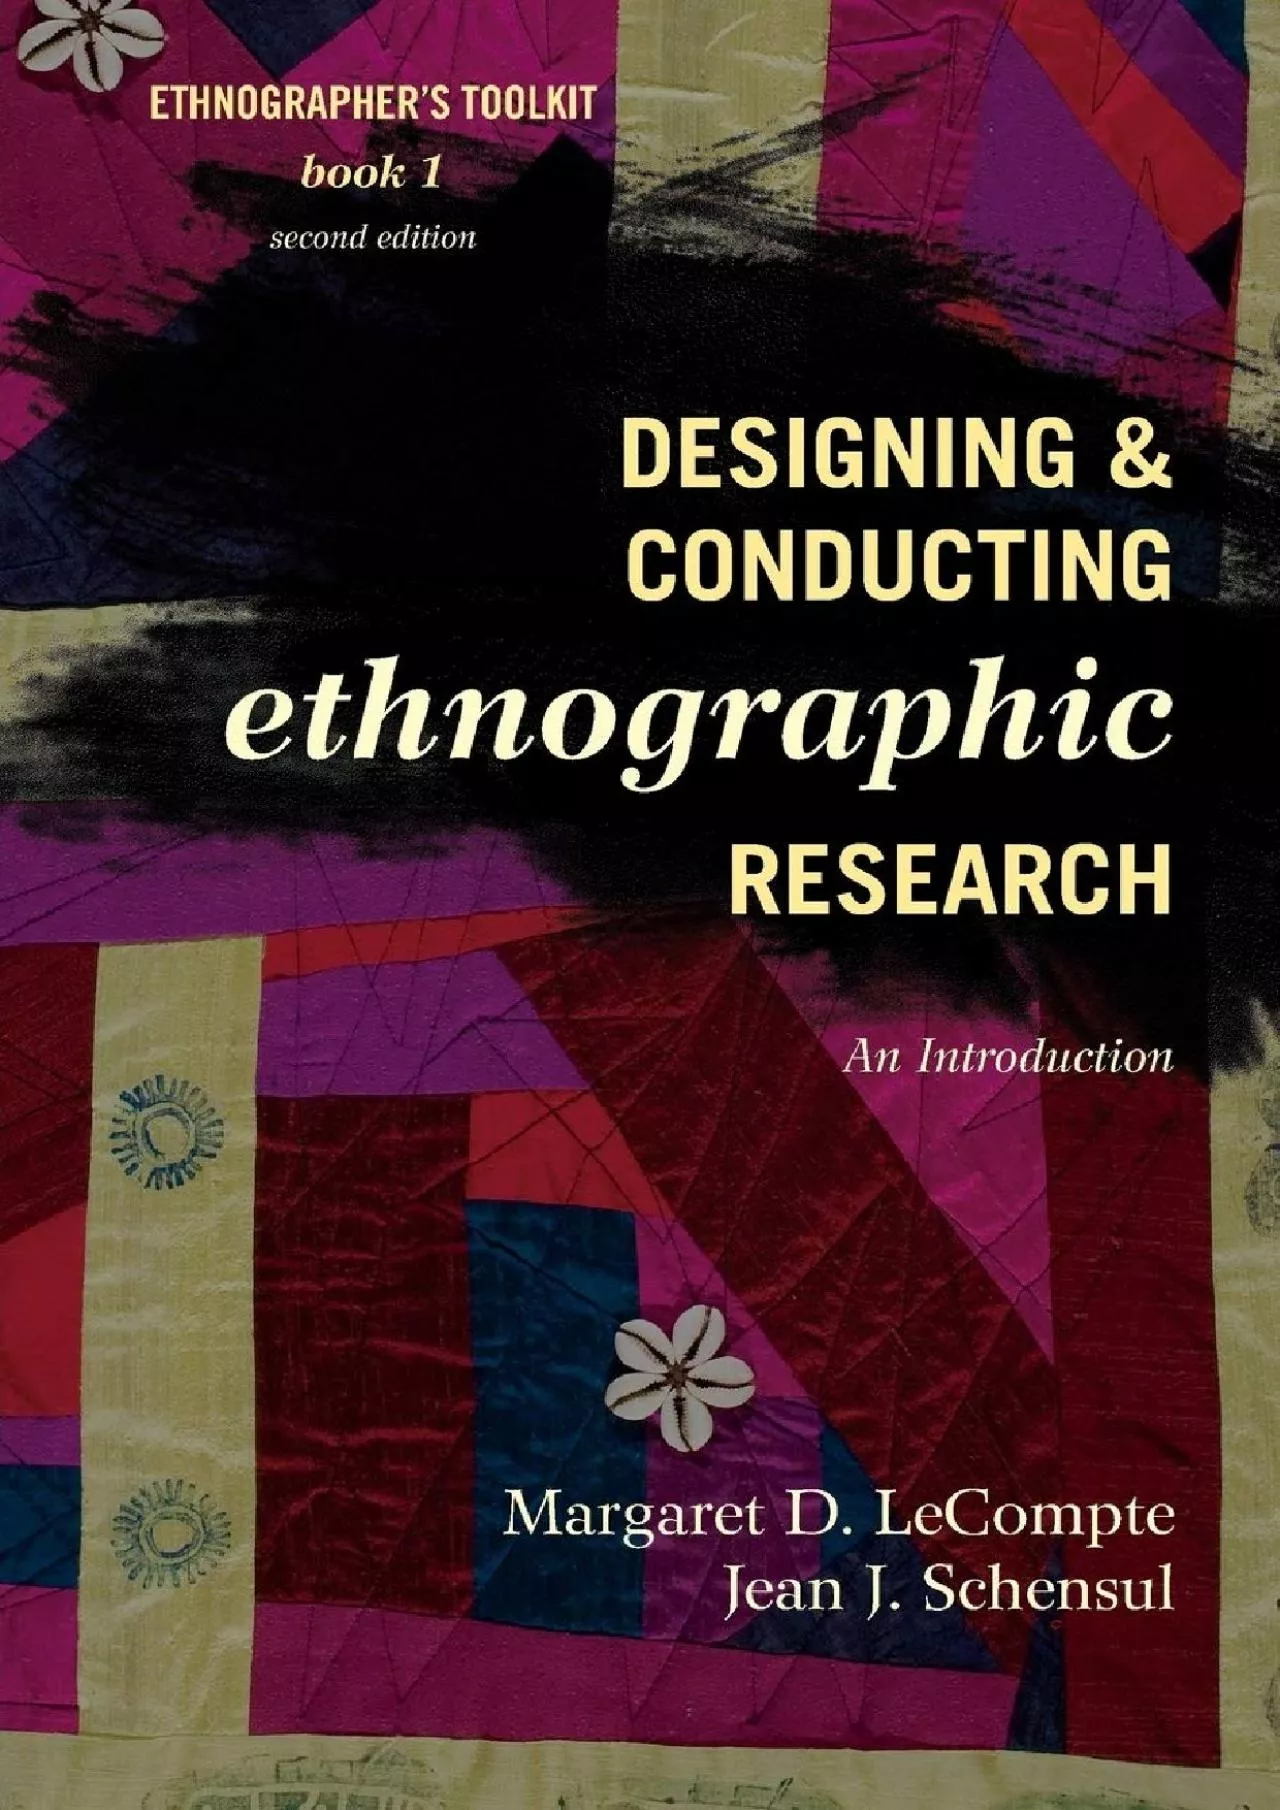 (BOOK)-Designing and Conducting Ethnographic Research: An Introduction (Volume 1) (Ethnographer\'s